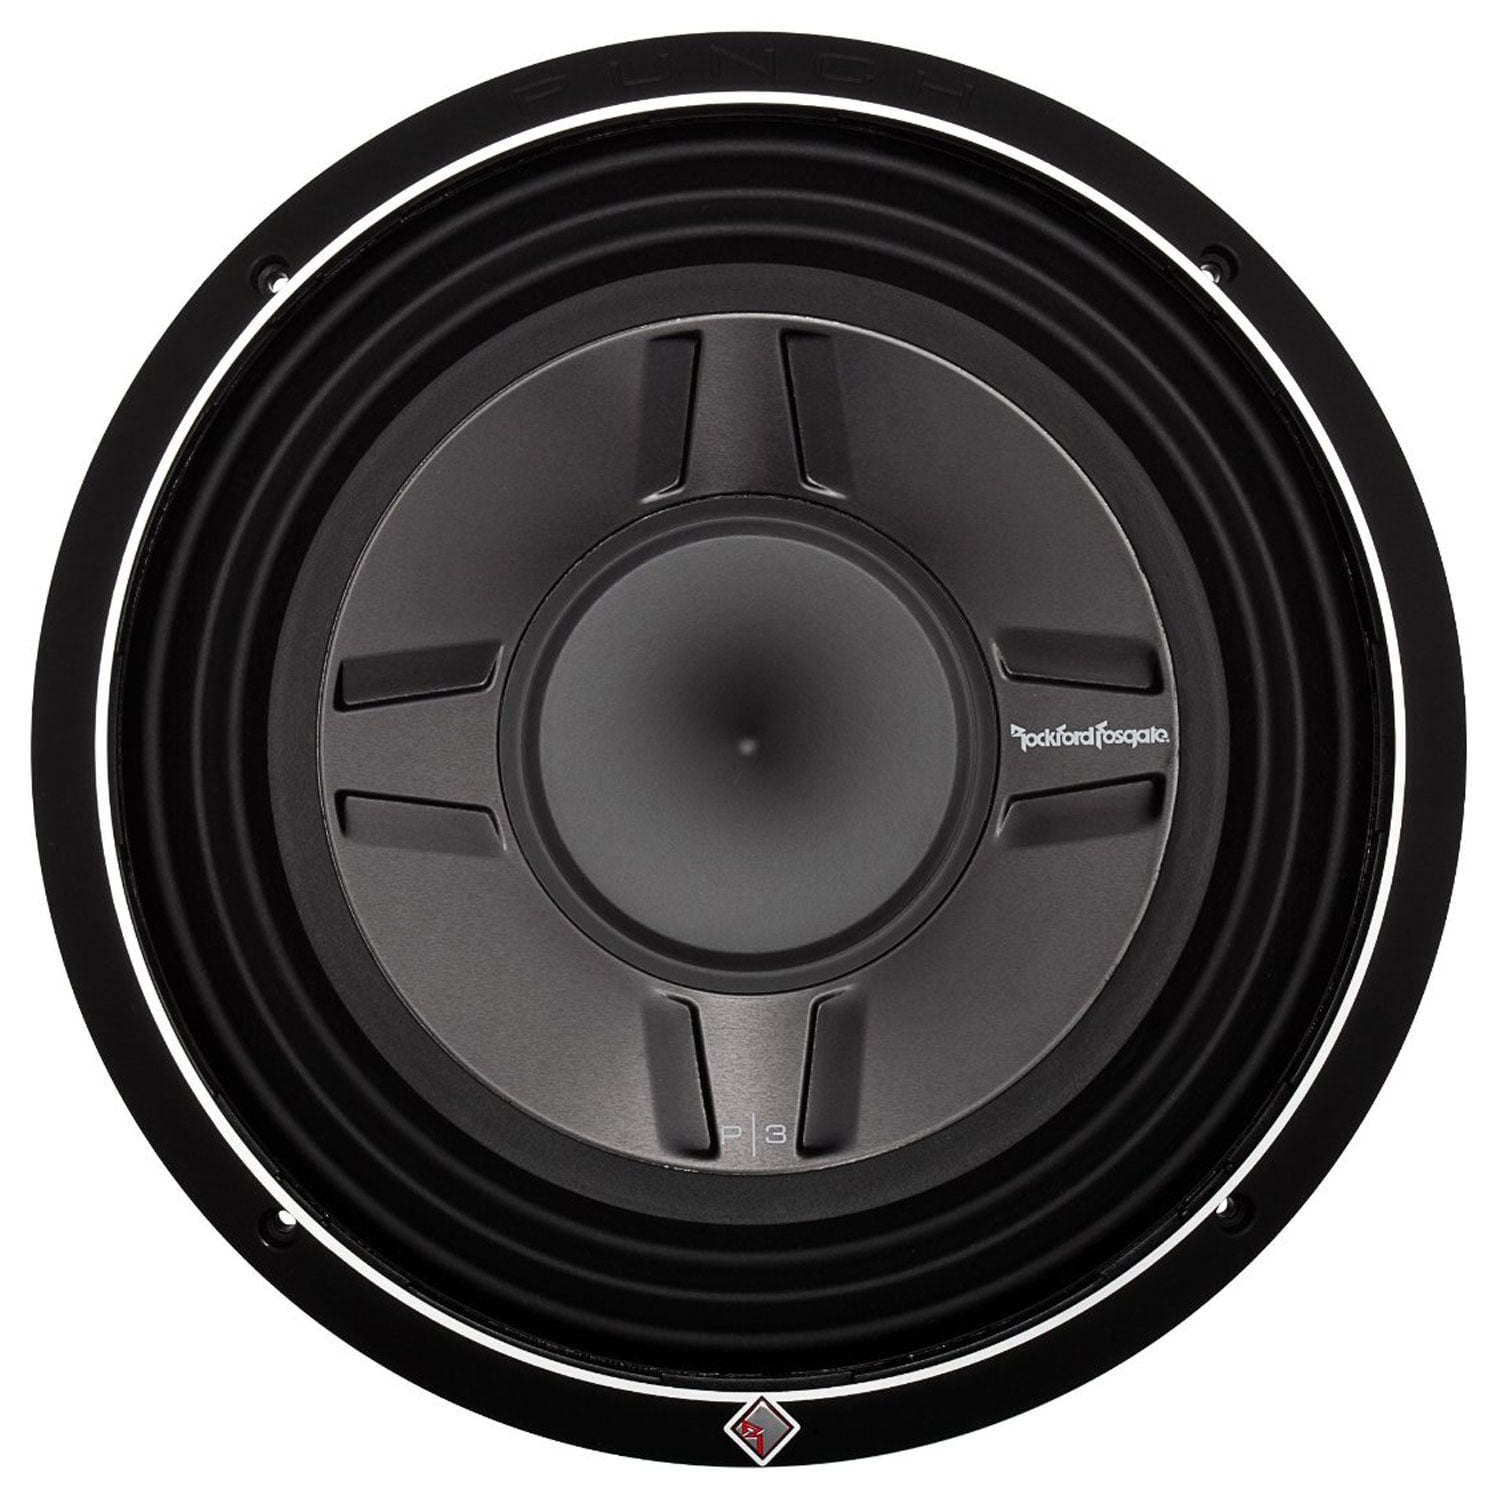 Rockford Fosgate P3SD4-12 Car 12” Subwoofer Shallow Mount 800W Sub P3SD412 New 